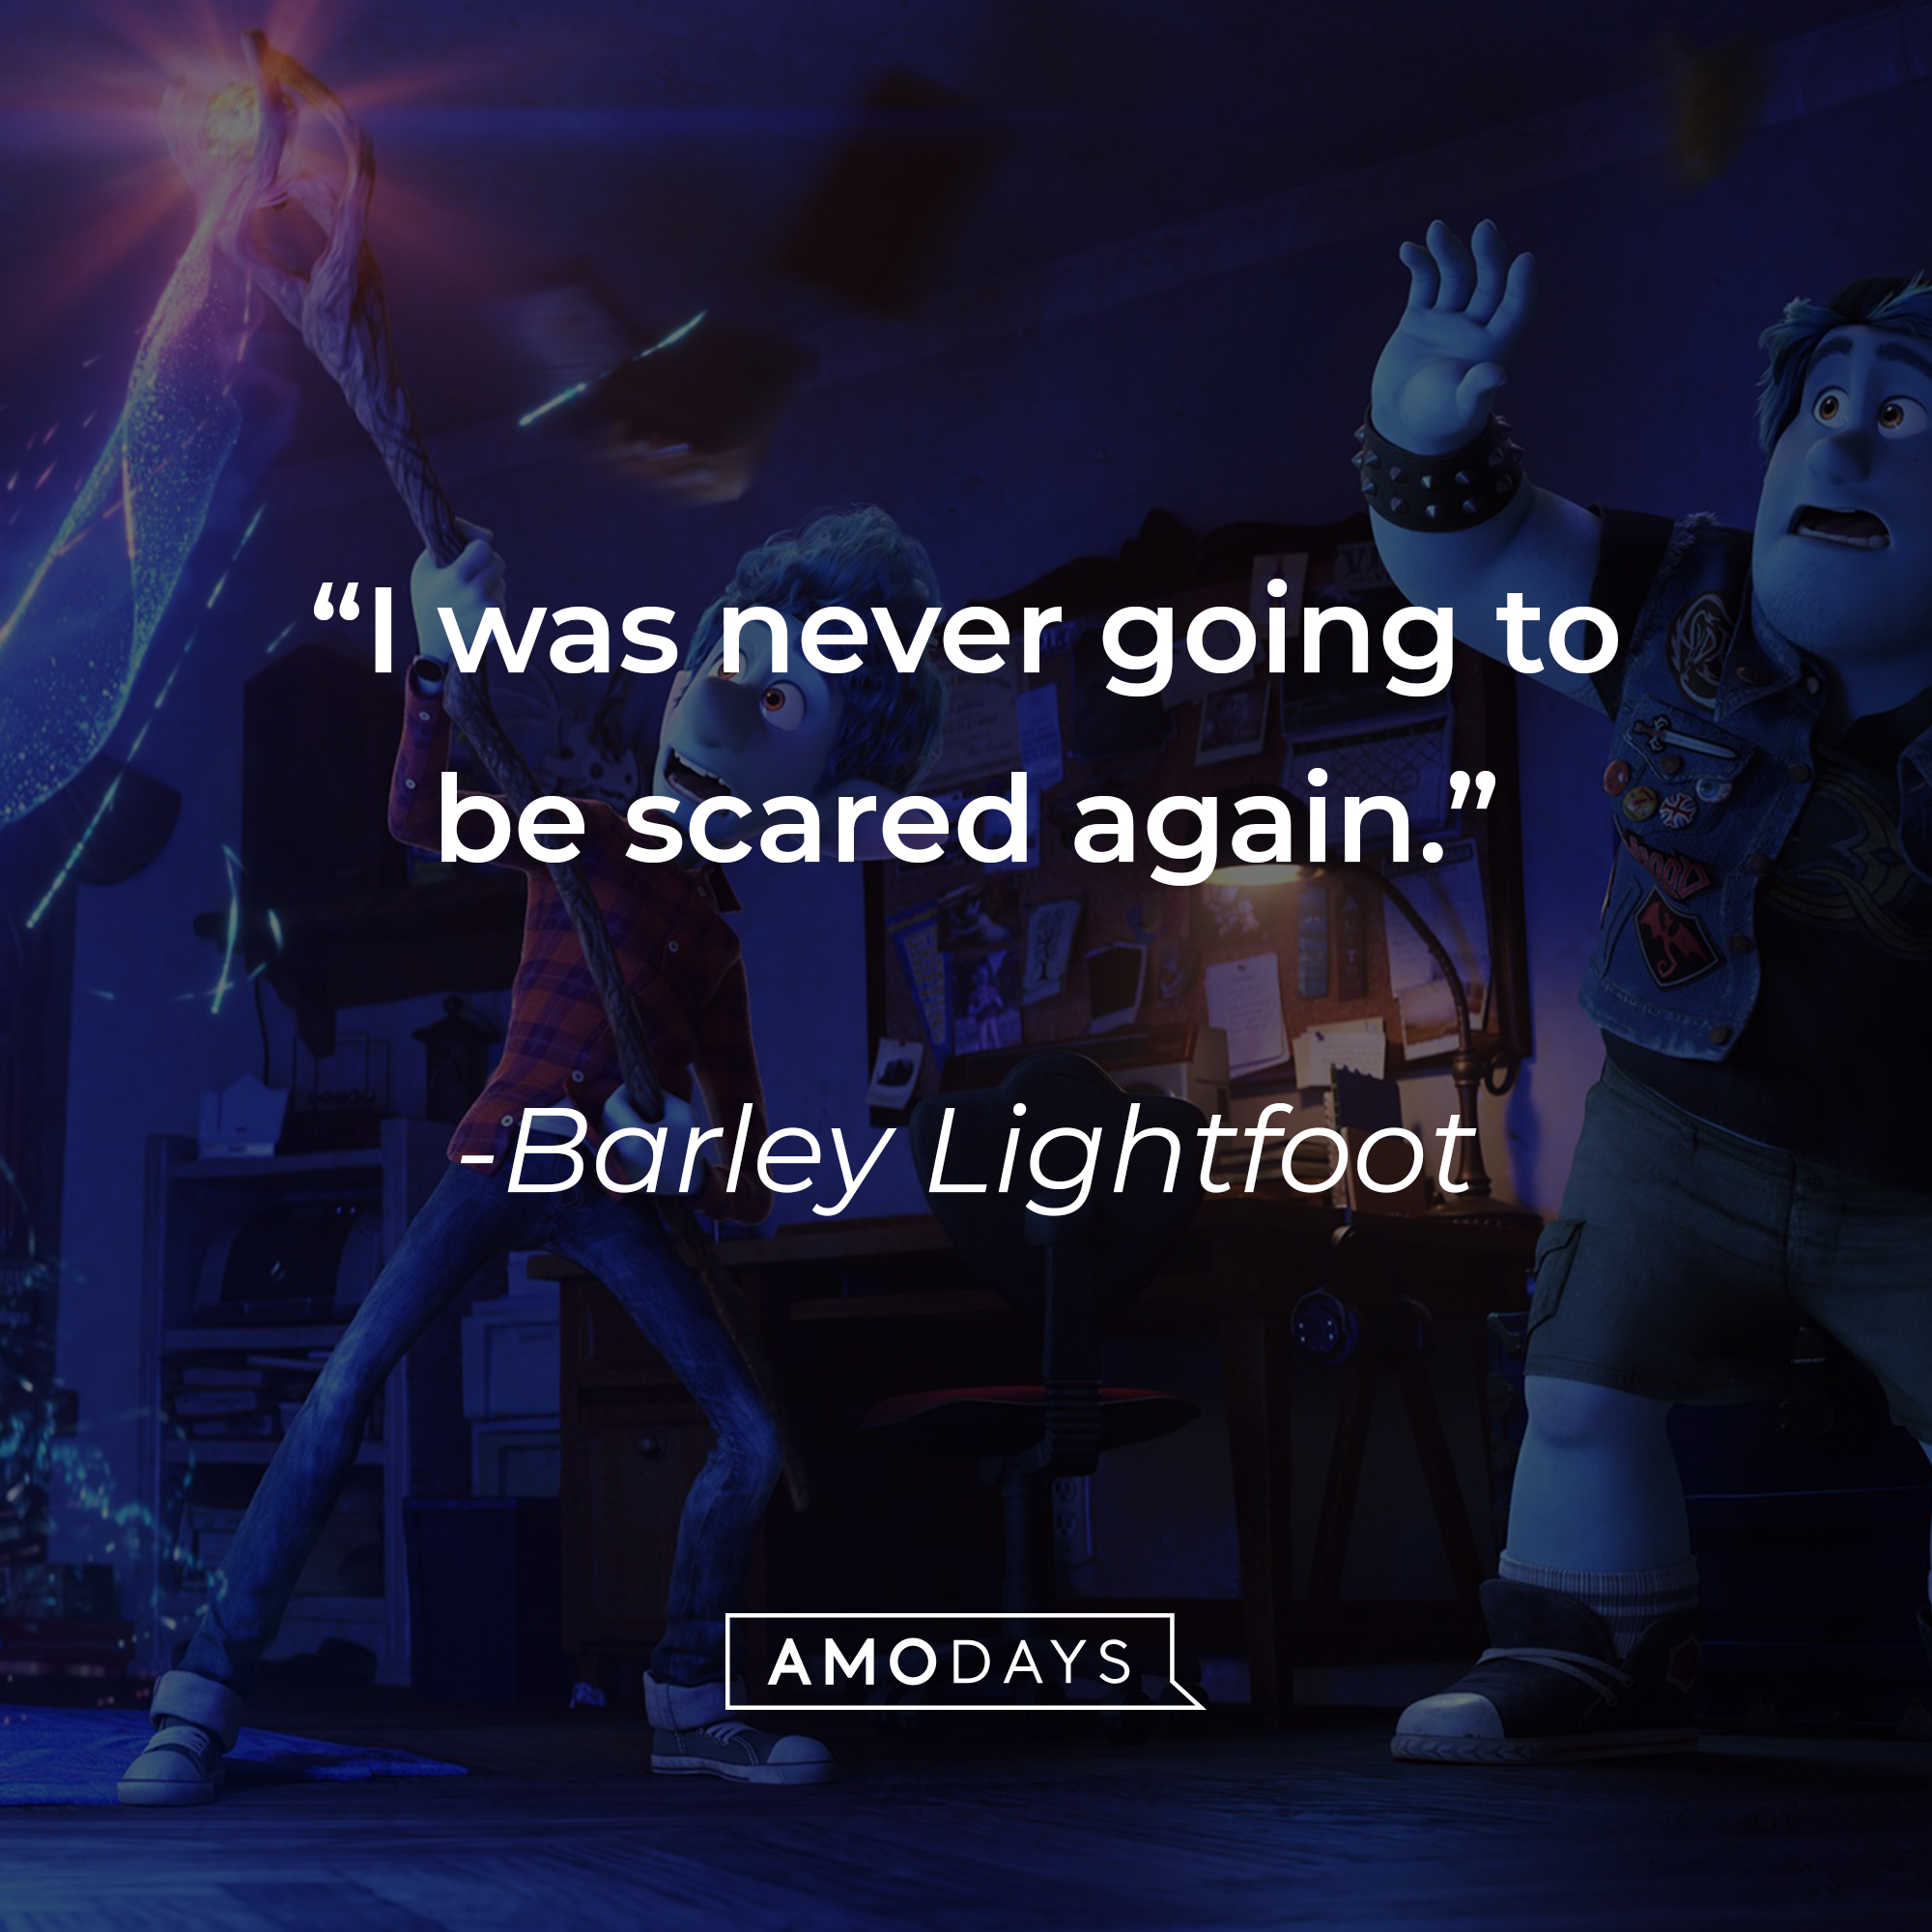 A still from Disney's "Onward" with Barley Lightfoot's quote: "I was never going to be scared again." | Source: facebook.com/pixaronward